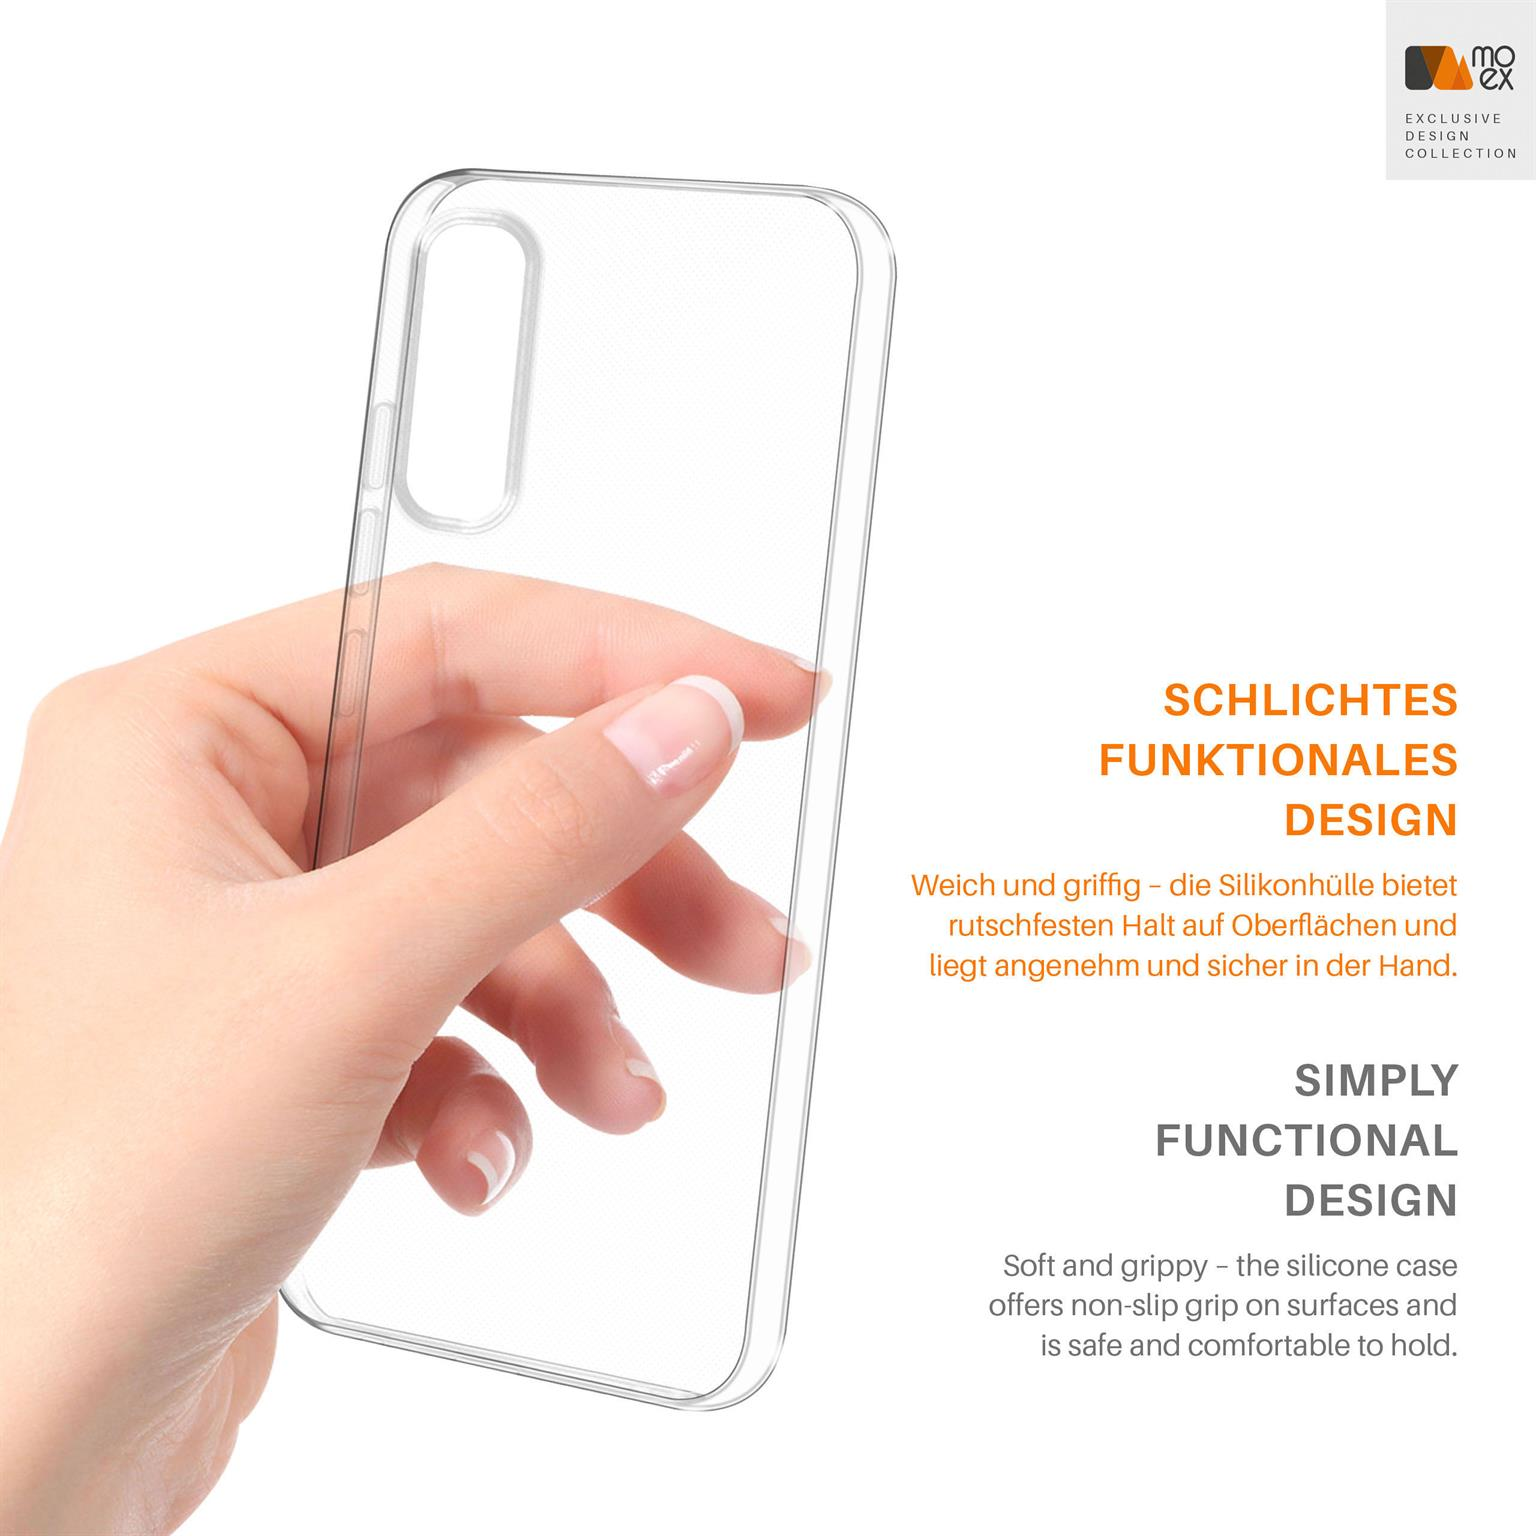 MOEX Aero Case, Backcover, Crystal-Clear Oppo, Neo, Find X2